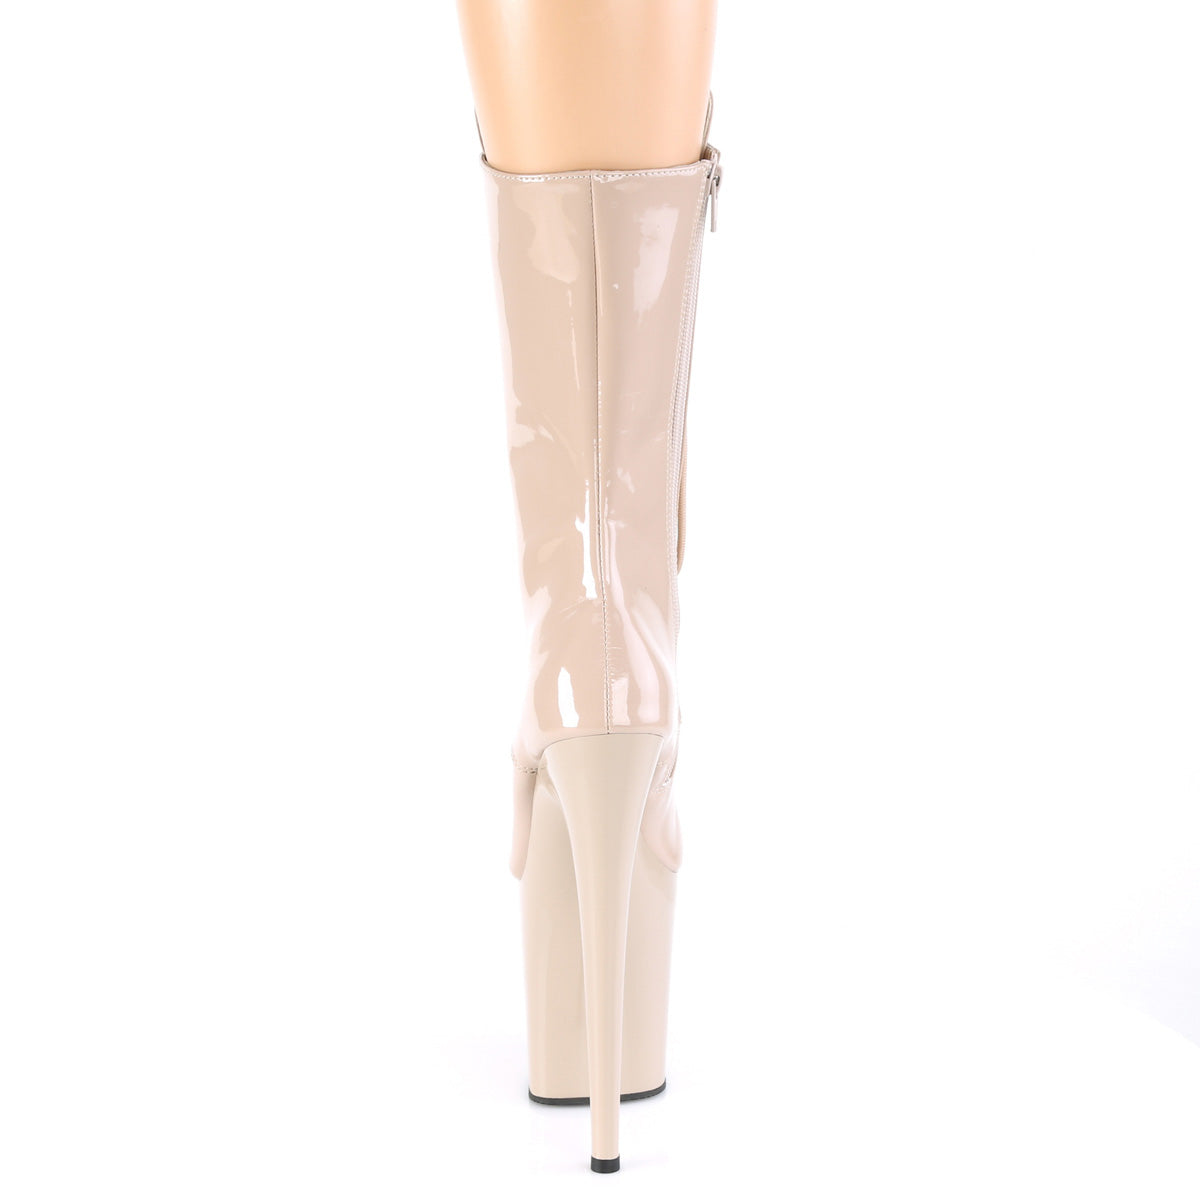 FLAMINGO-1050/ND/M 8" PLEASER FAST DELIVERY 24-48h